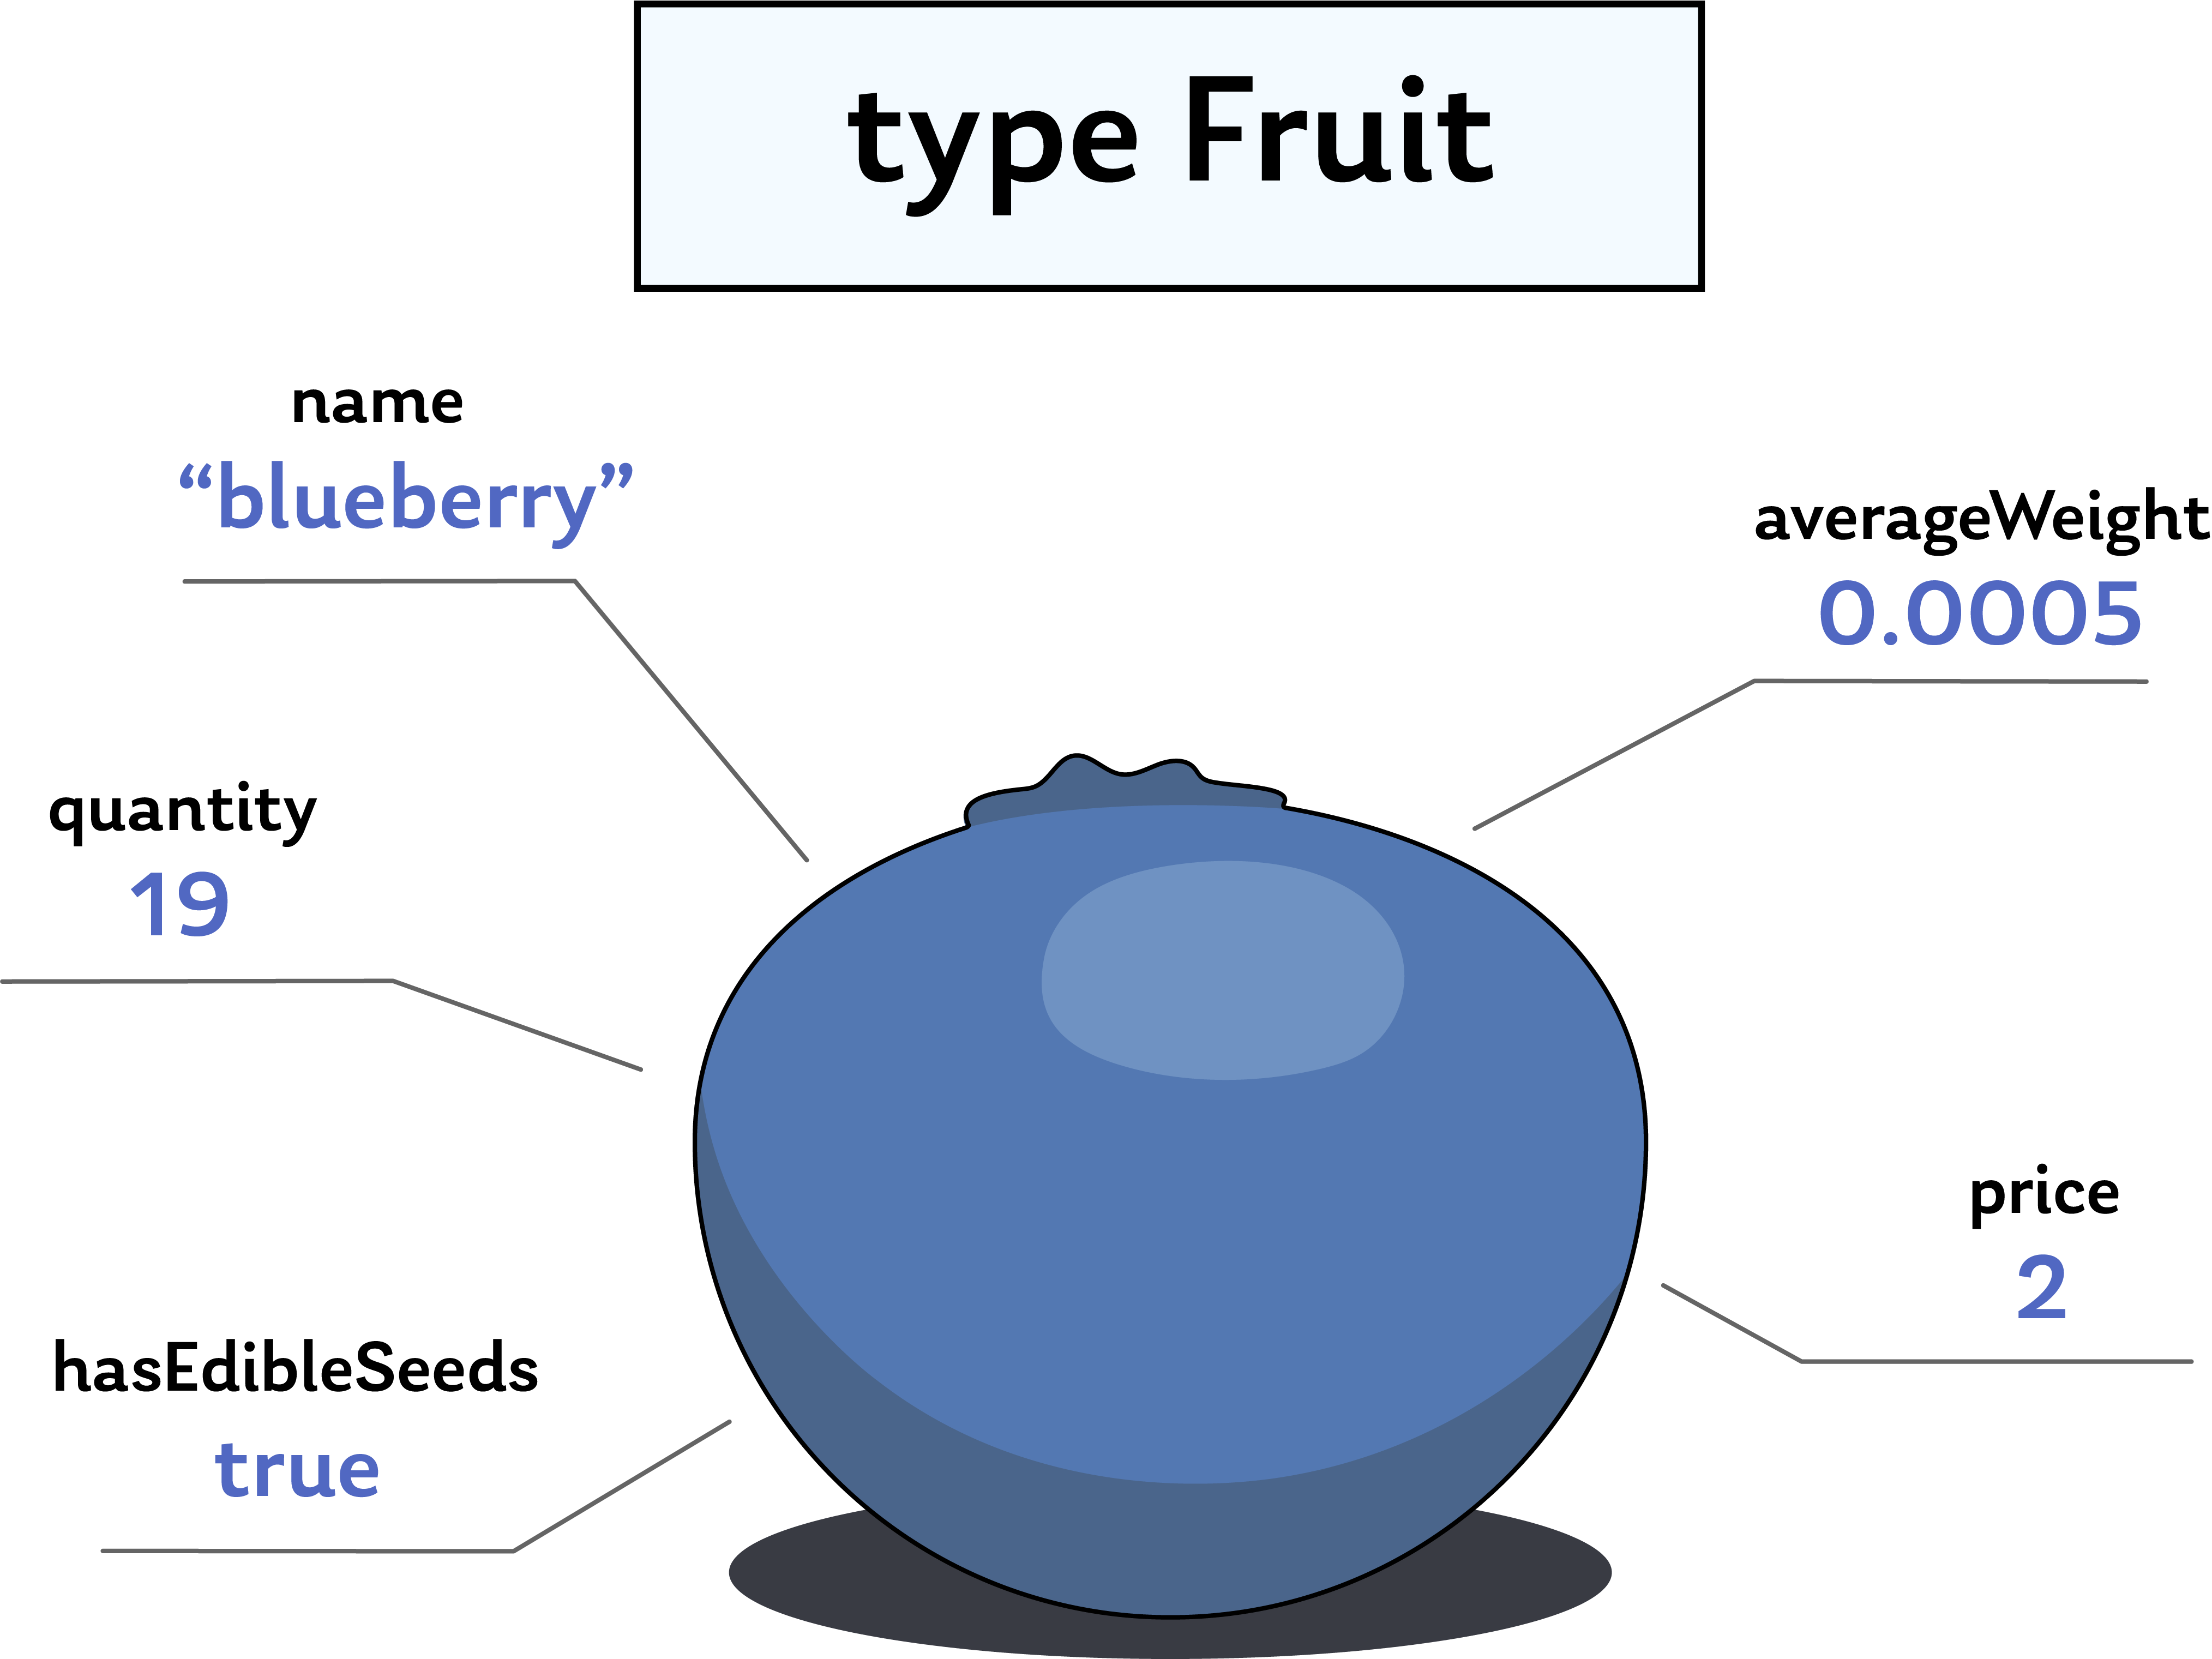 A blueberry is specified as a Fruit type with fields for name, quantity, hasEdibleSeeds, averageWeight, and price.